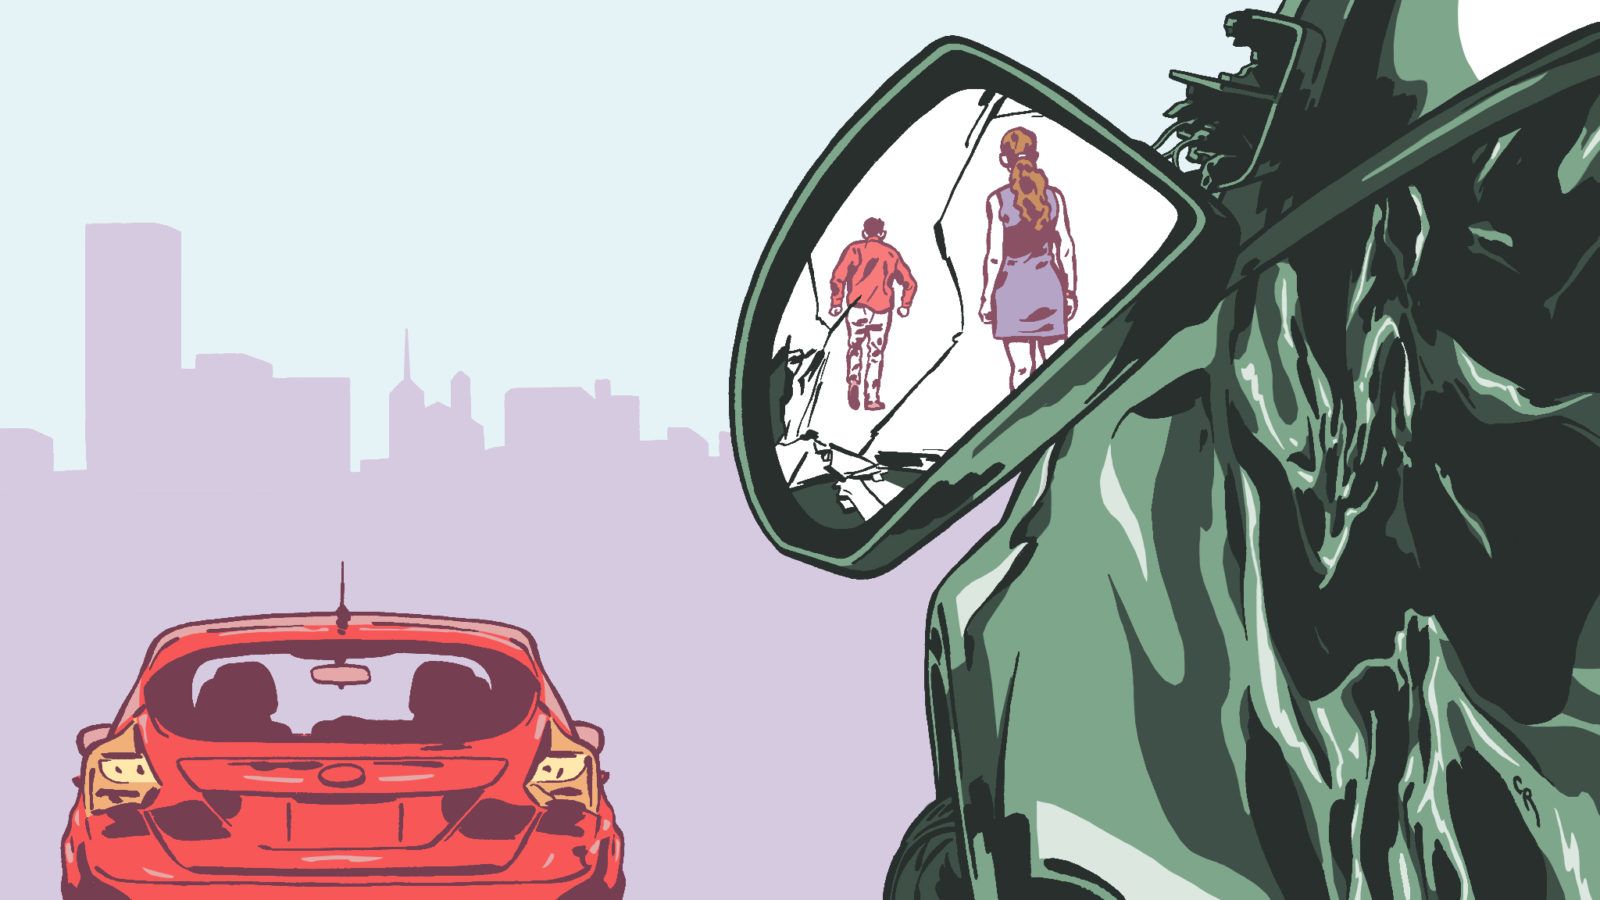 That Time I Hit a Parked Car—and Just Walked Away